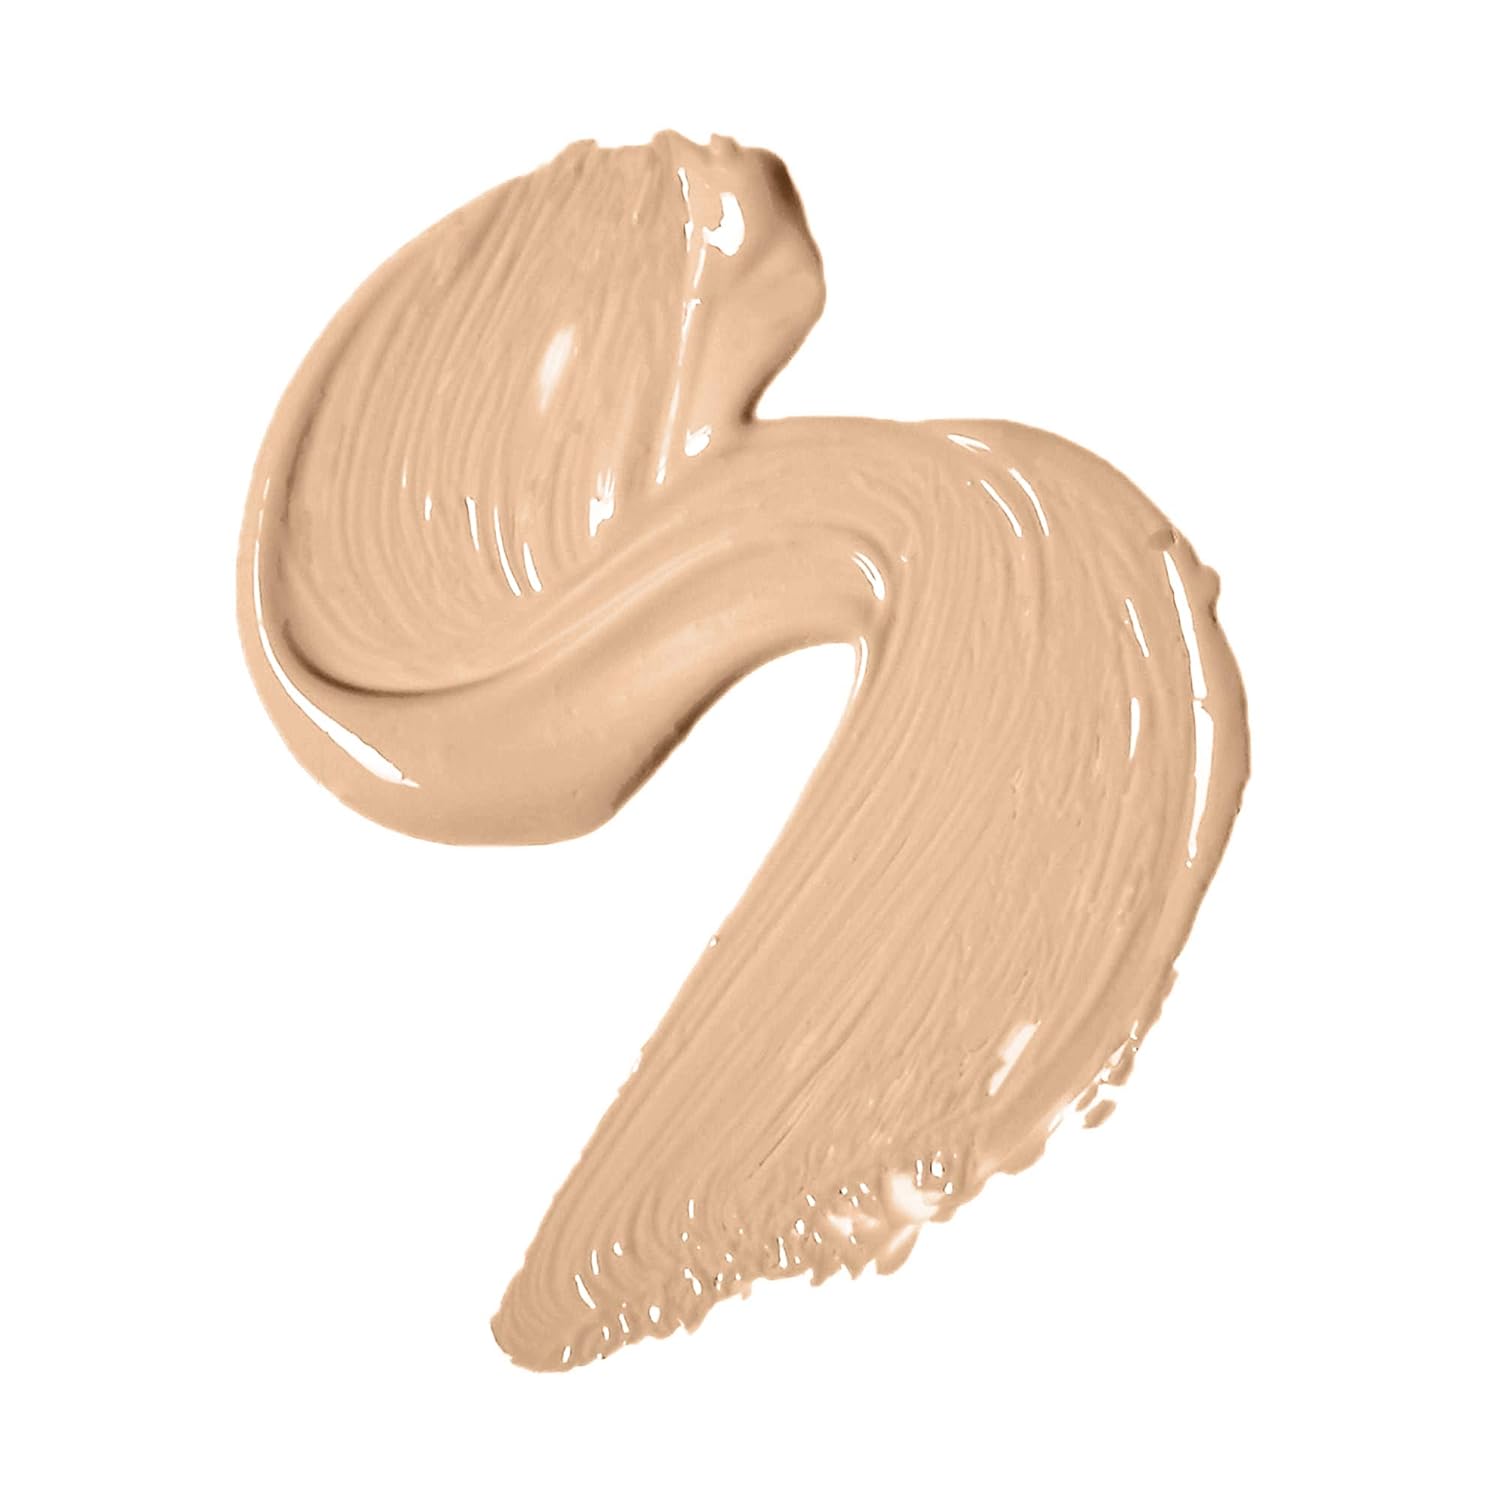  E.l.f. e.l.f, Hydrating Camo Concealer, Lightweight, Full Coverage, Long Lasting, Conceals, Corrects, Covers, Hydrates, Highlights, Light Ivory, Satin Finish, 25 Shades, All-Day Wear, 0.2